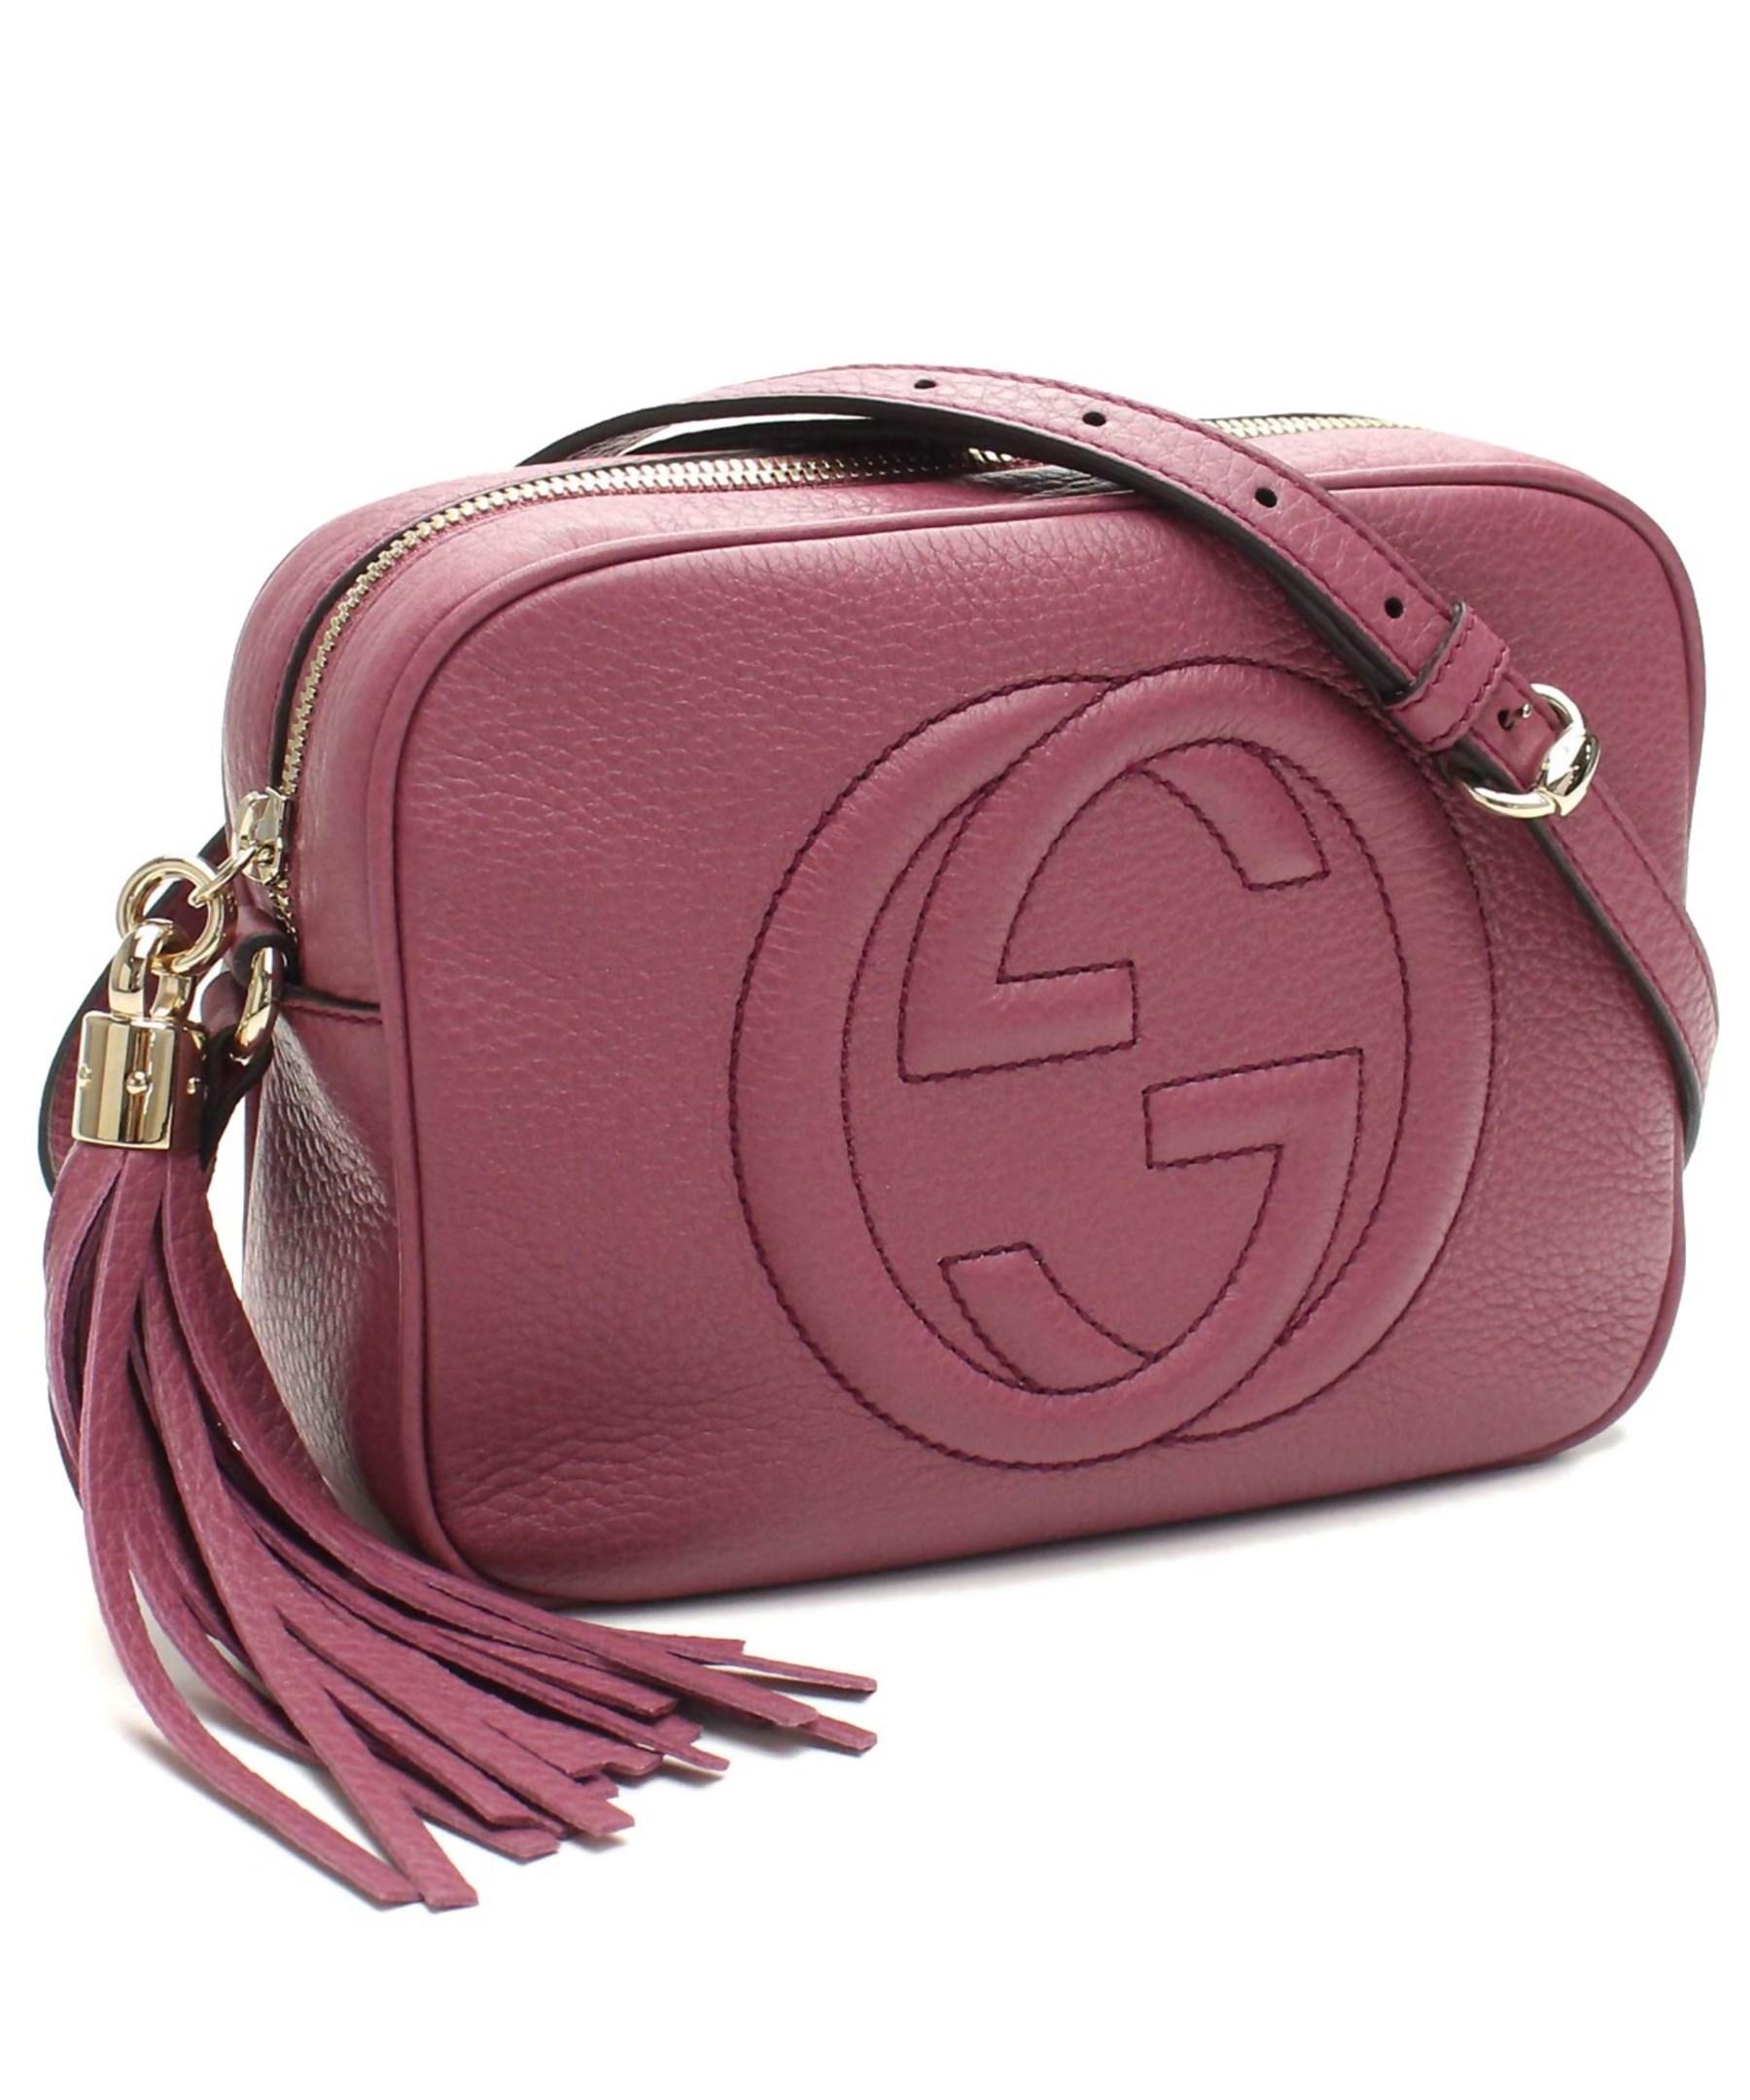 Gucci Soho Leather Disco Shoulder Bag in Pink - Lyst